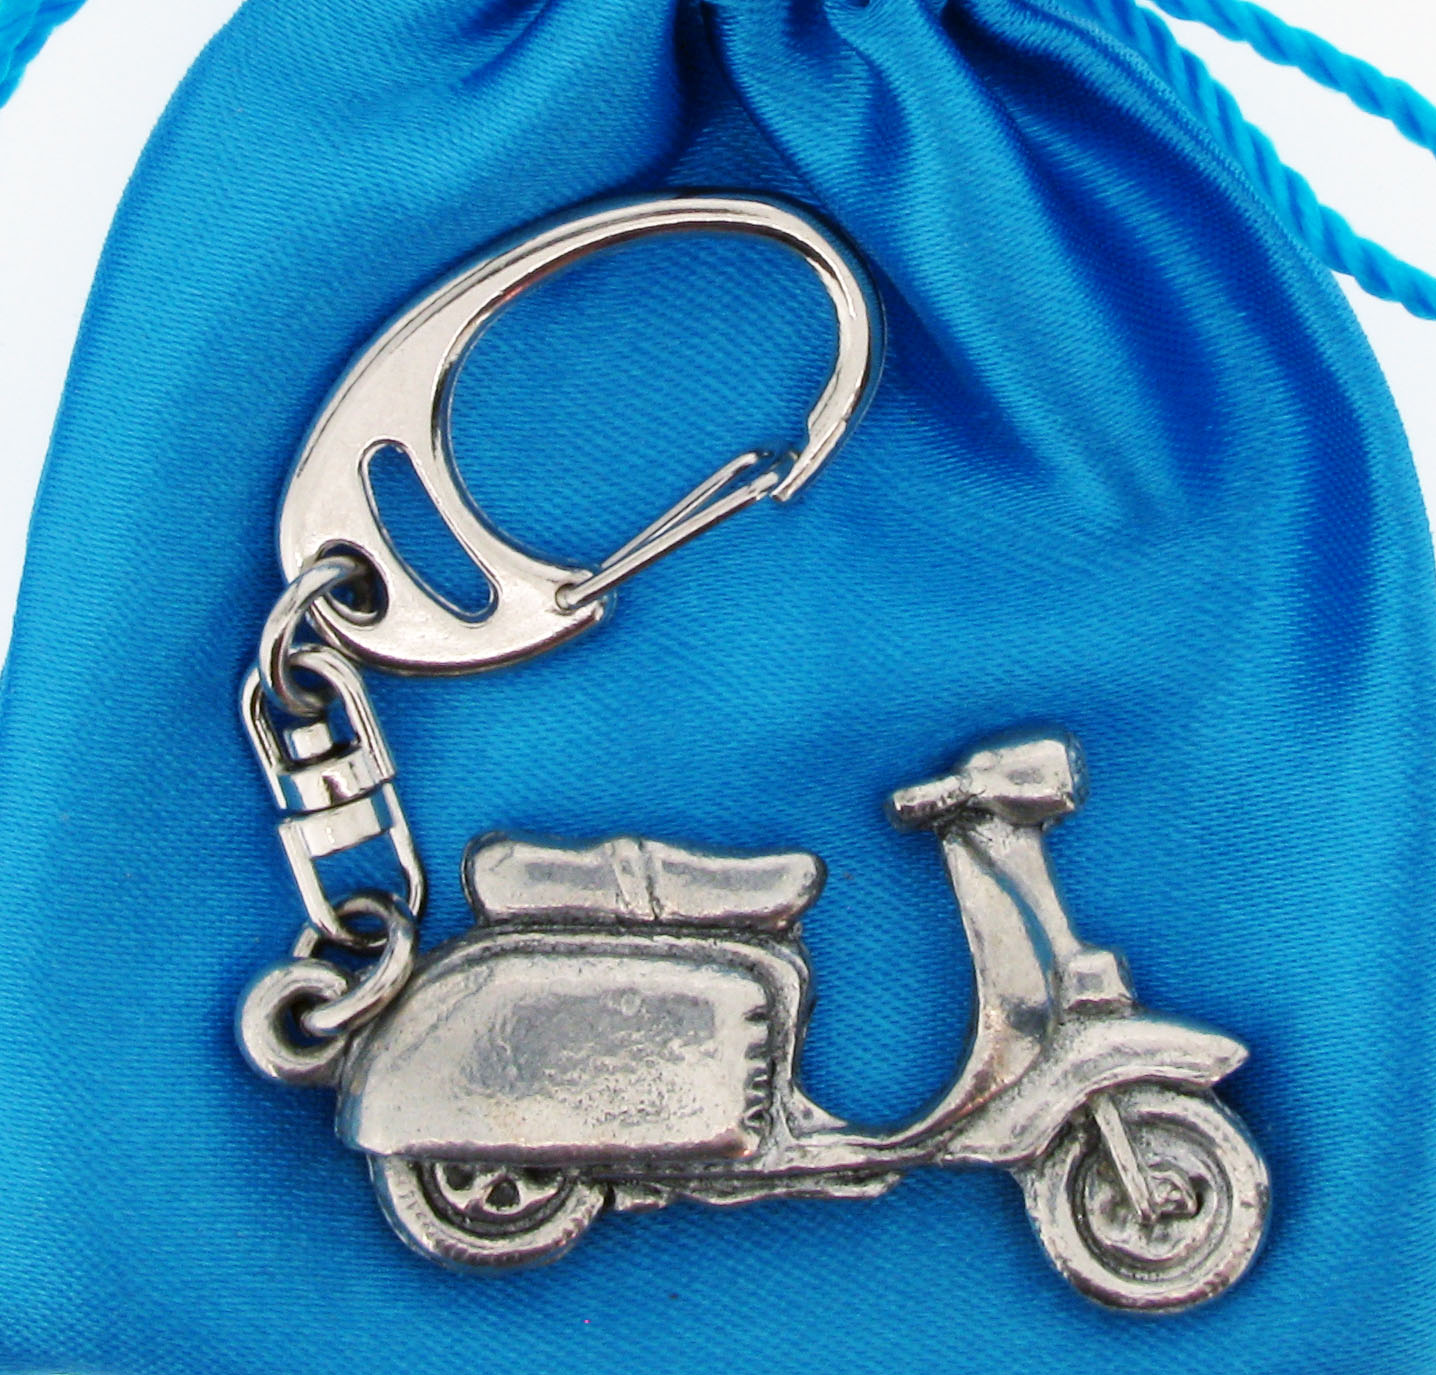 Scooter L Keyring - high quality pewter gifts from Pageant Pewter